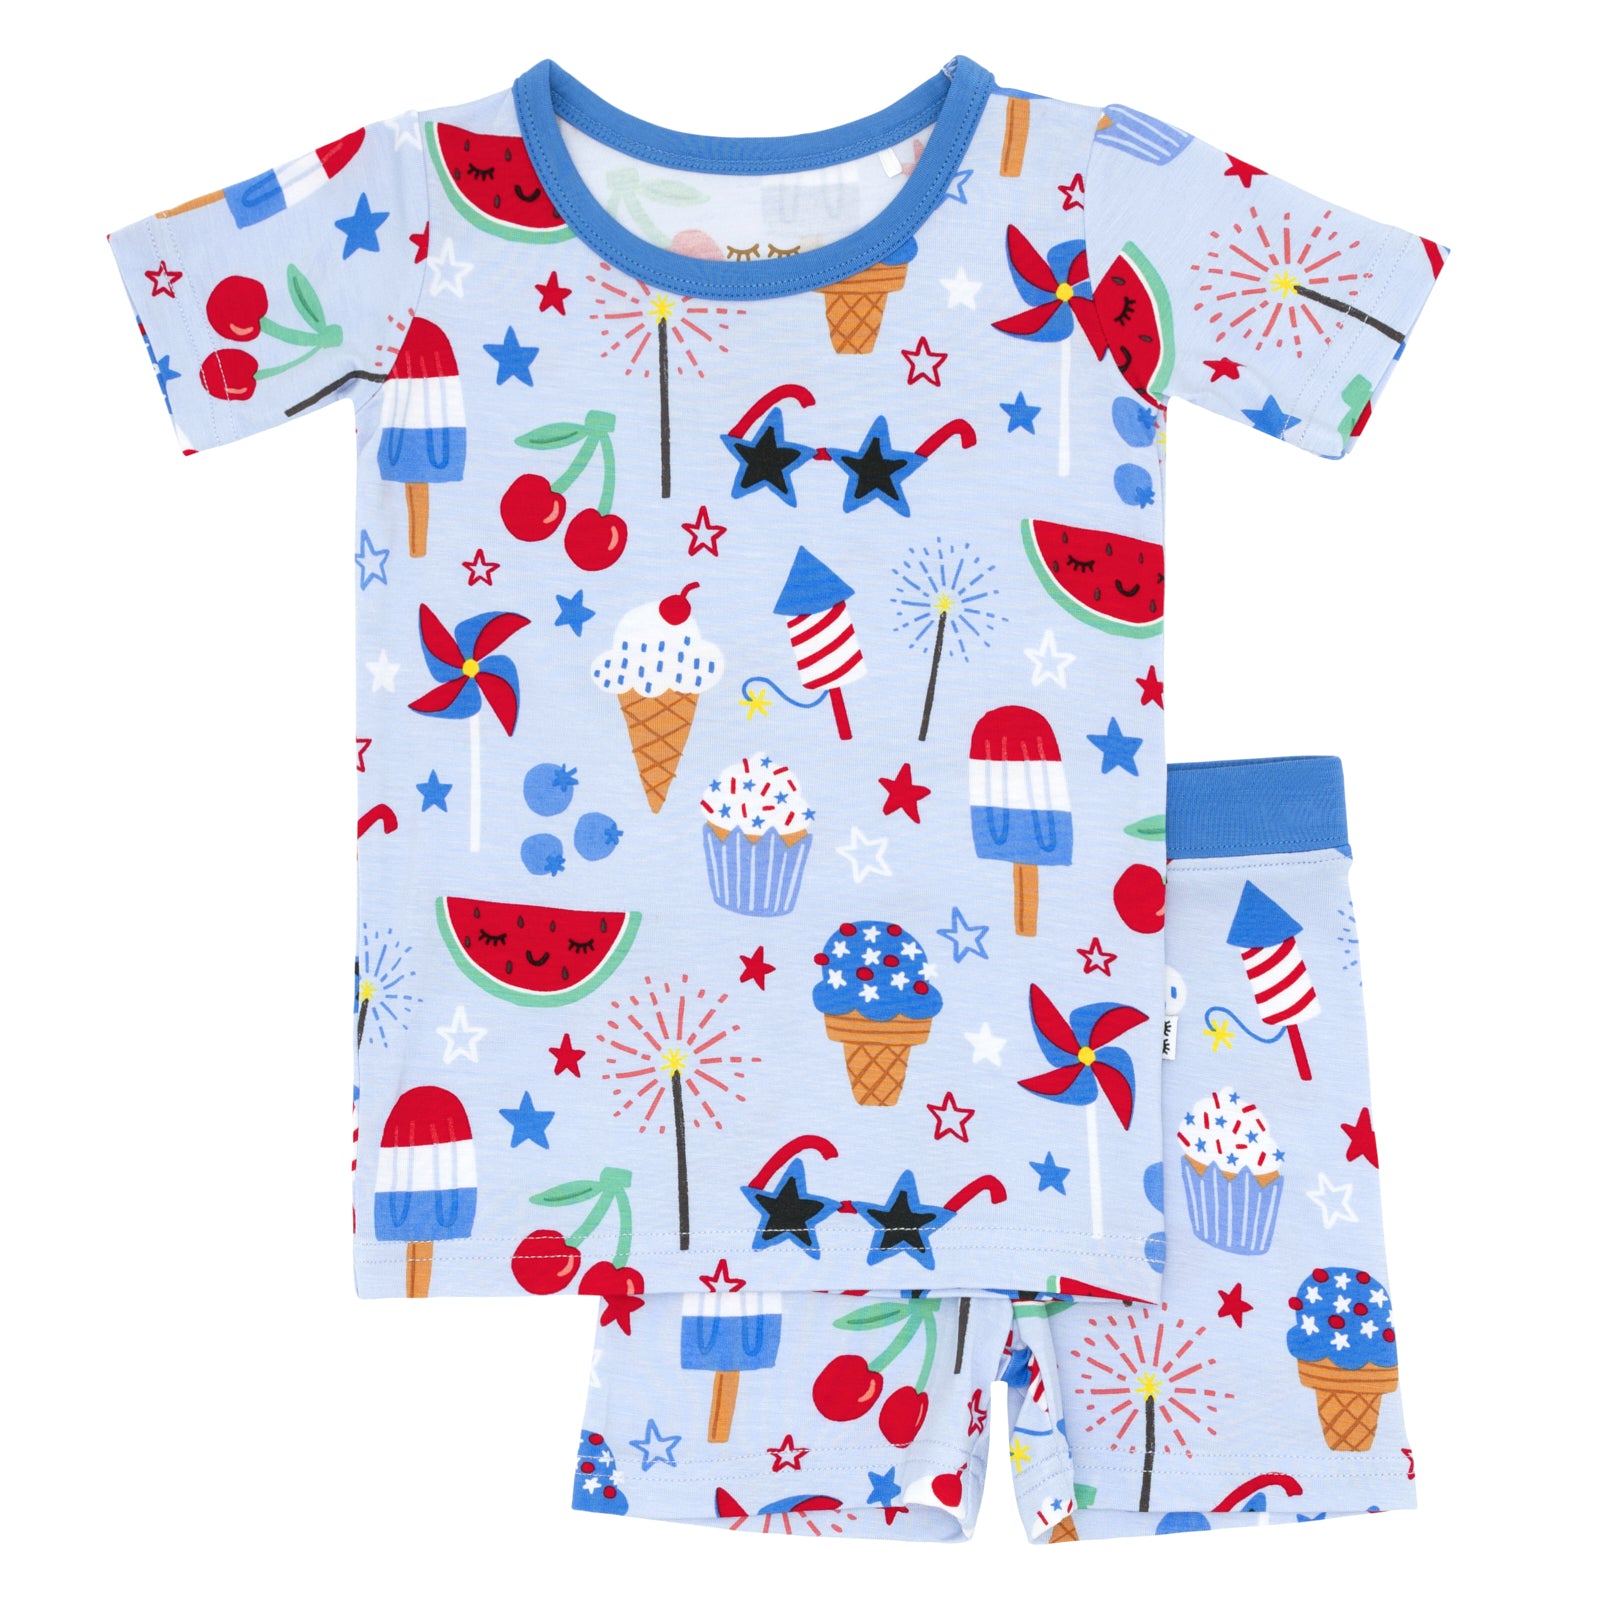 Flat lay image of a Stars Stripes and Sweets two piece short sleeve and shorts pj set